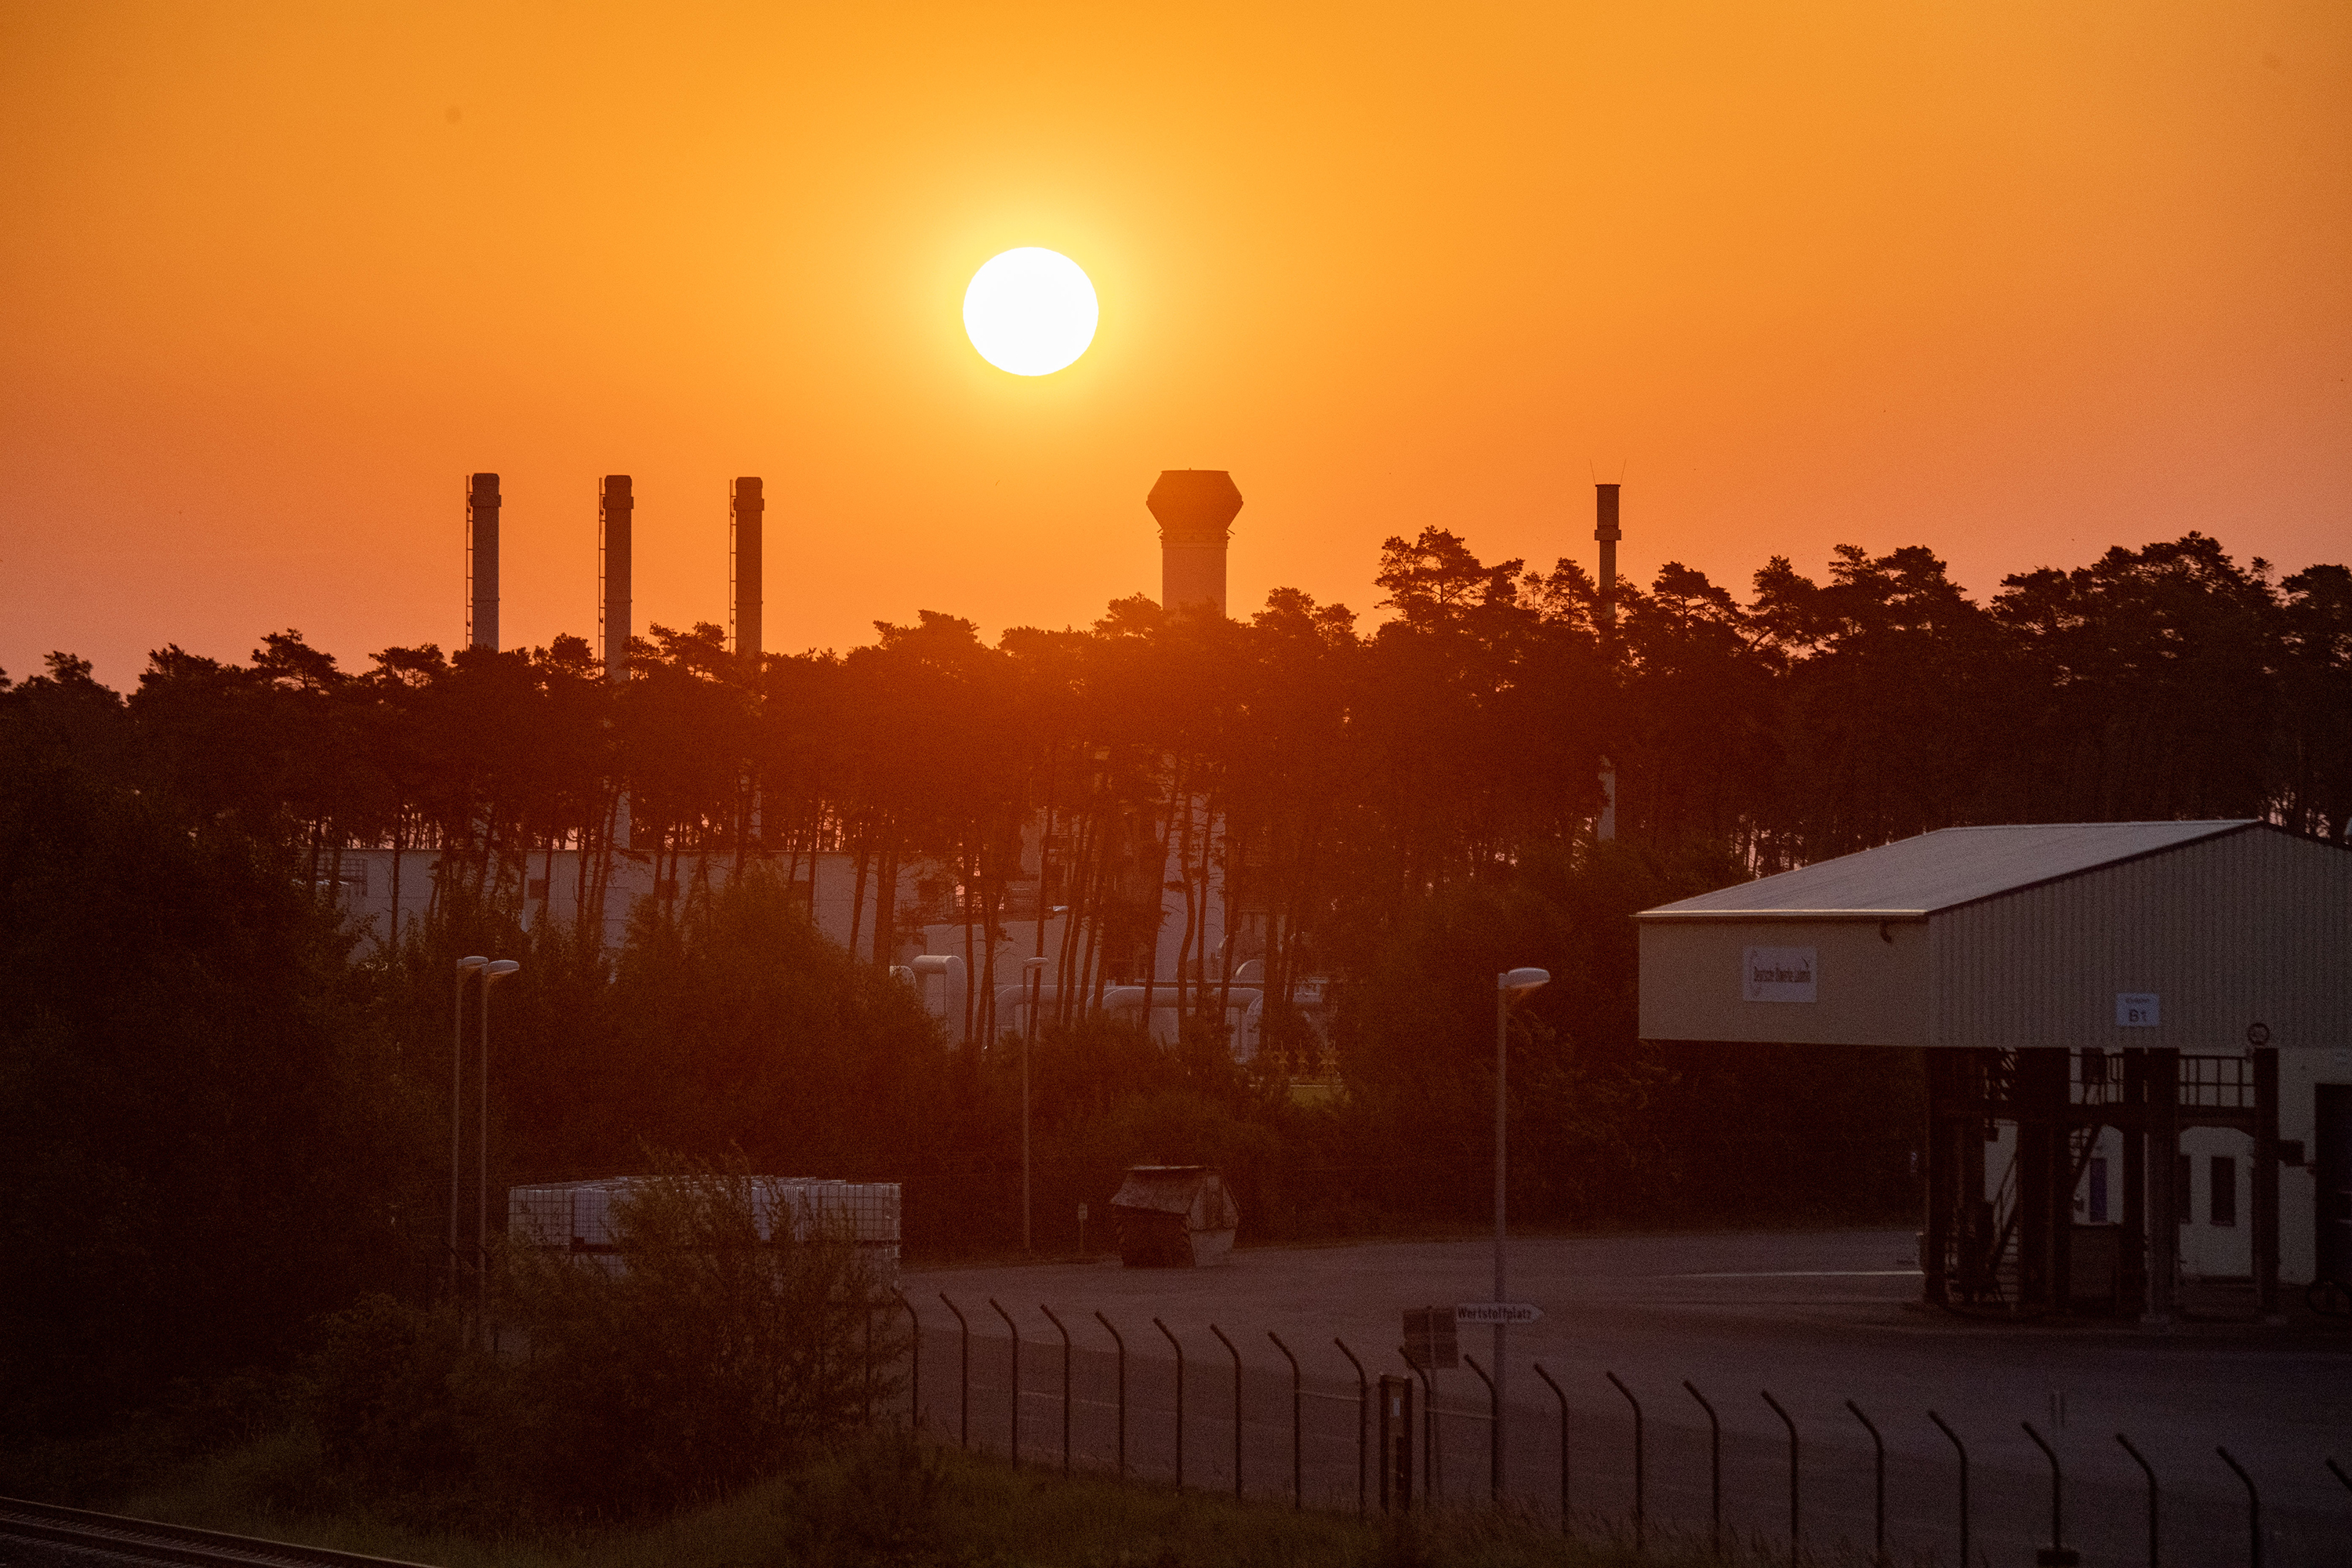 Sunrise over the gas receiving station of the Nord Stream 1 pipeline is seen in Lubmin, Germany on July 21.